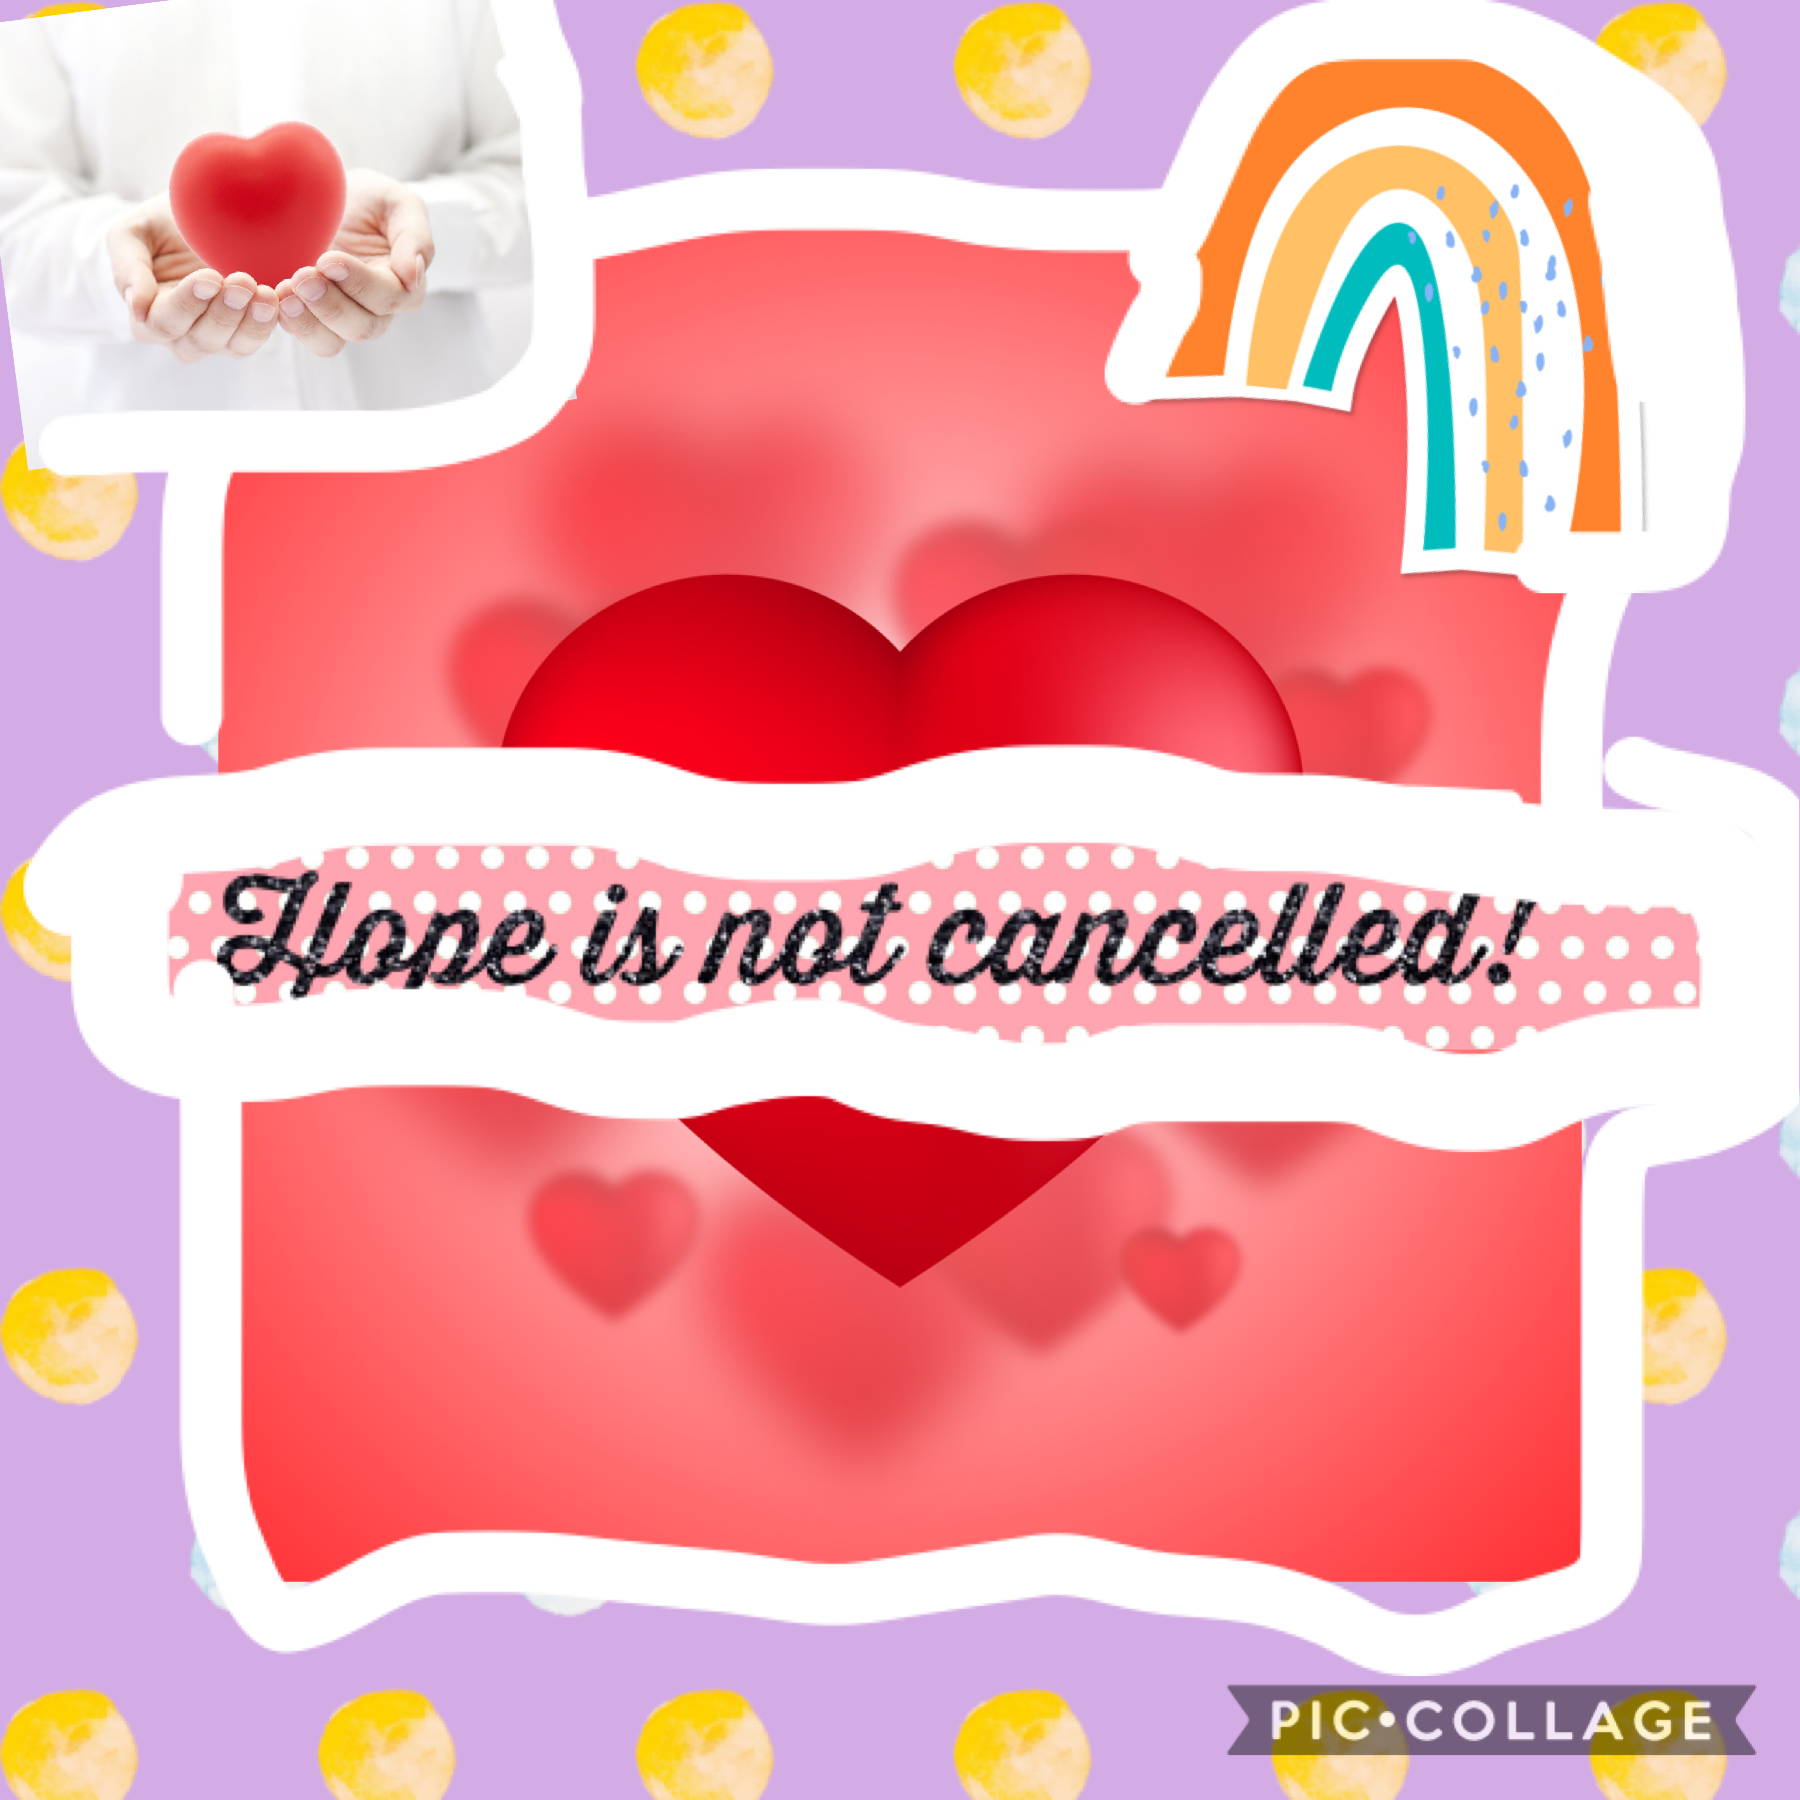 Hope is never cancelled!!!